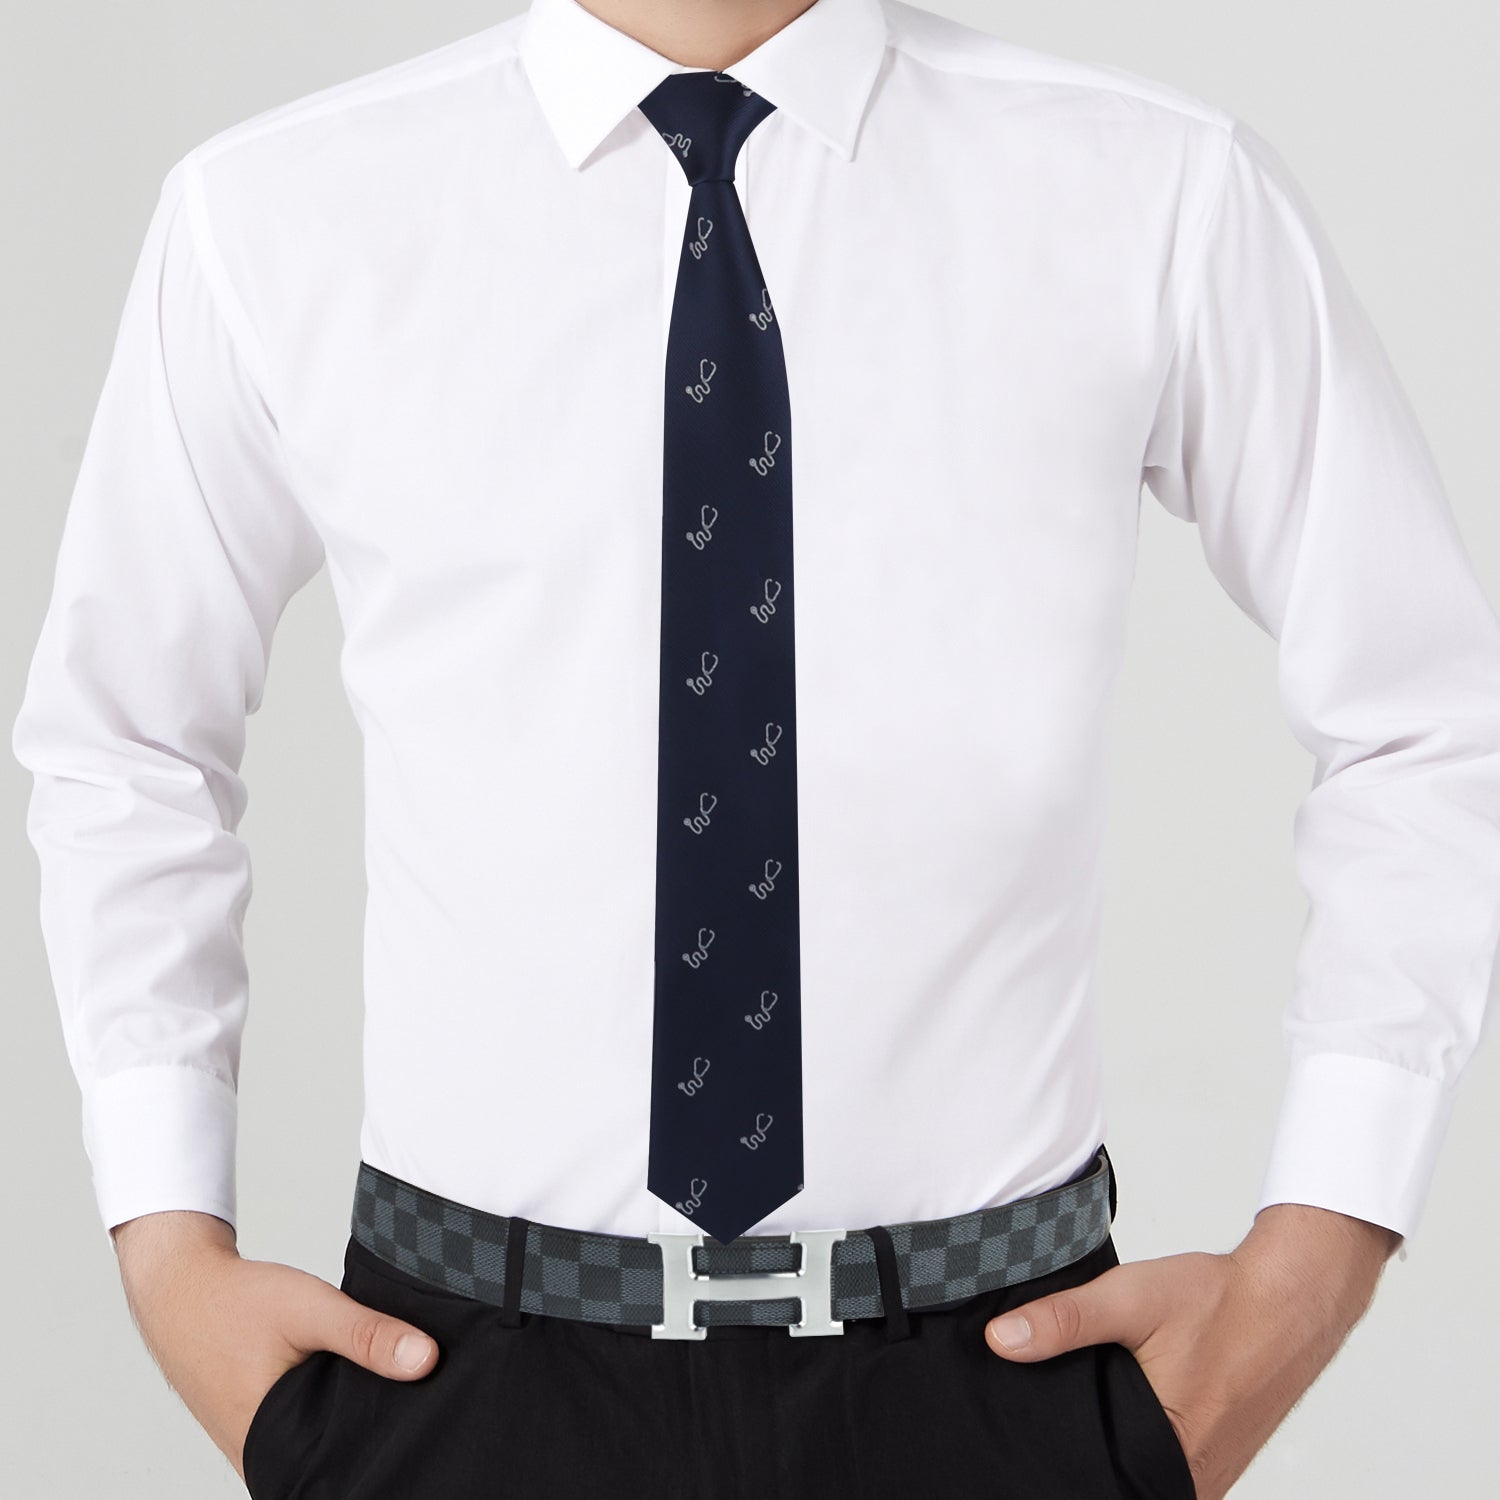 A man wearing an extraordinary Stethoscope Skinny Tie and white shirt.